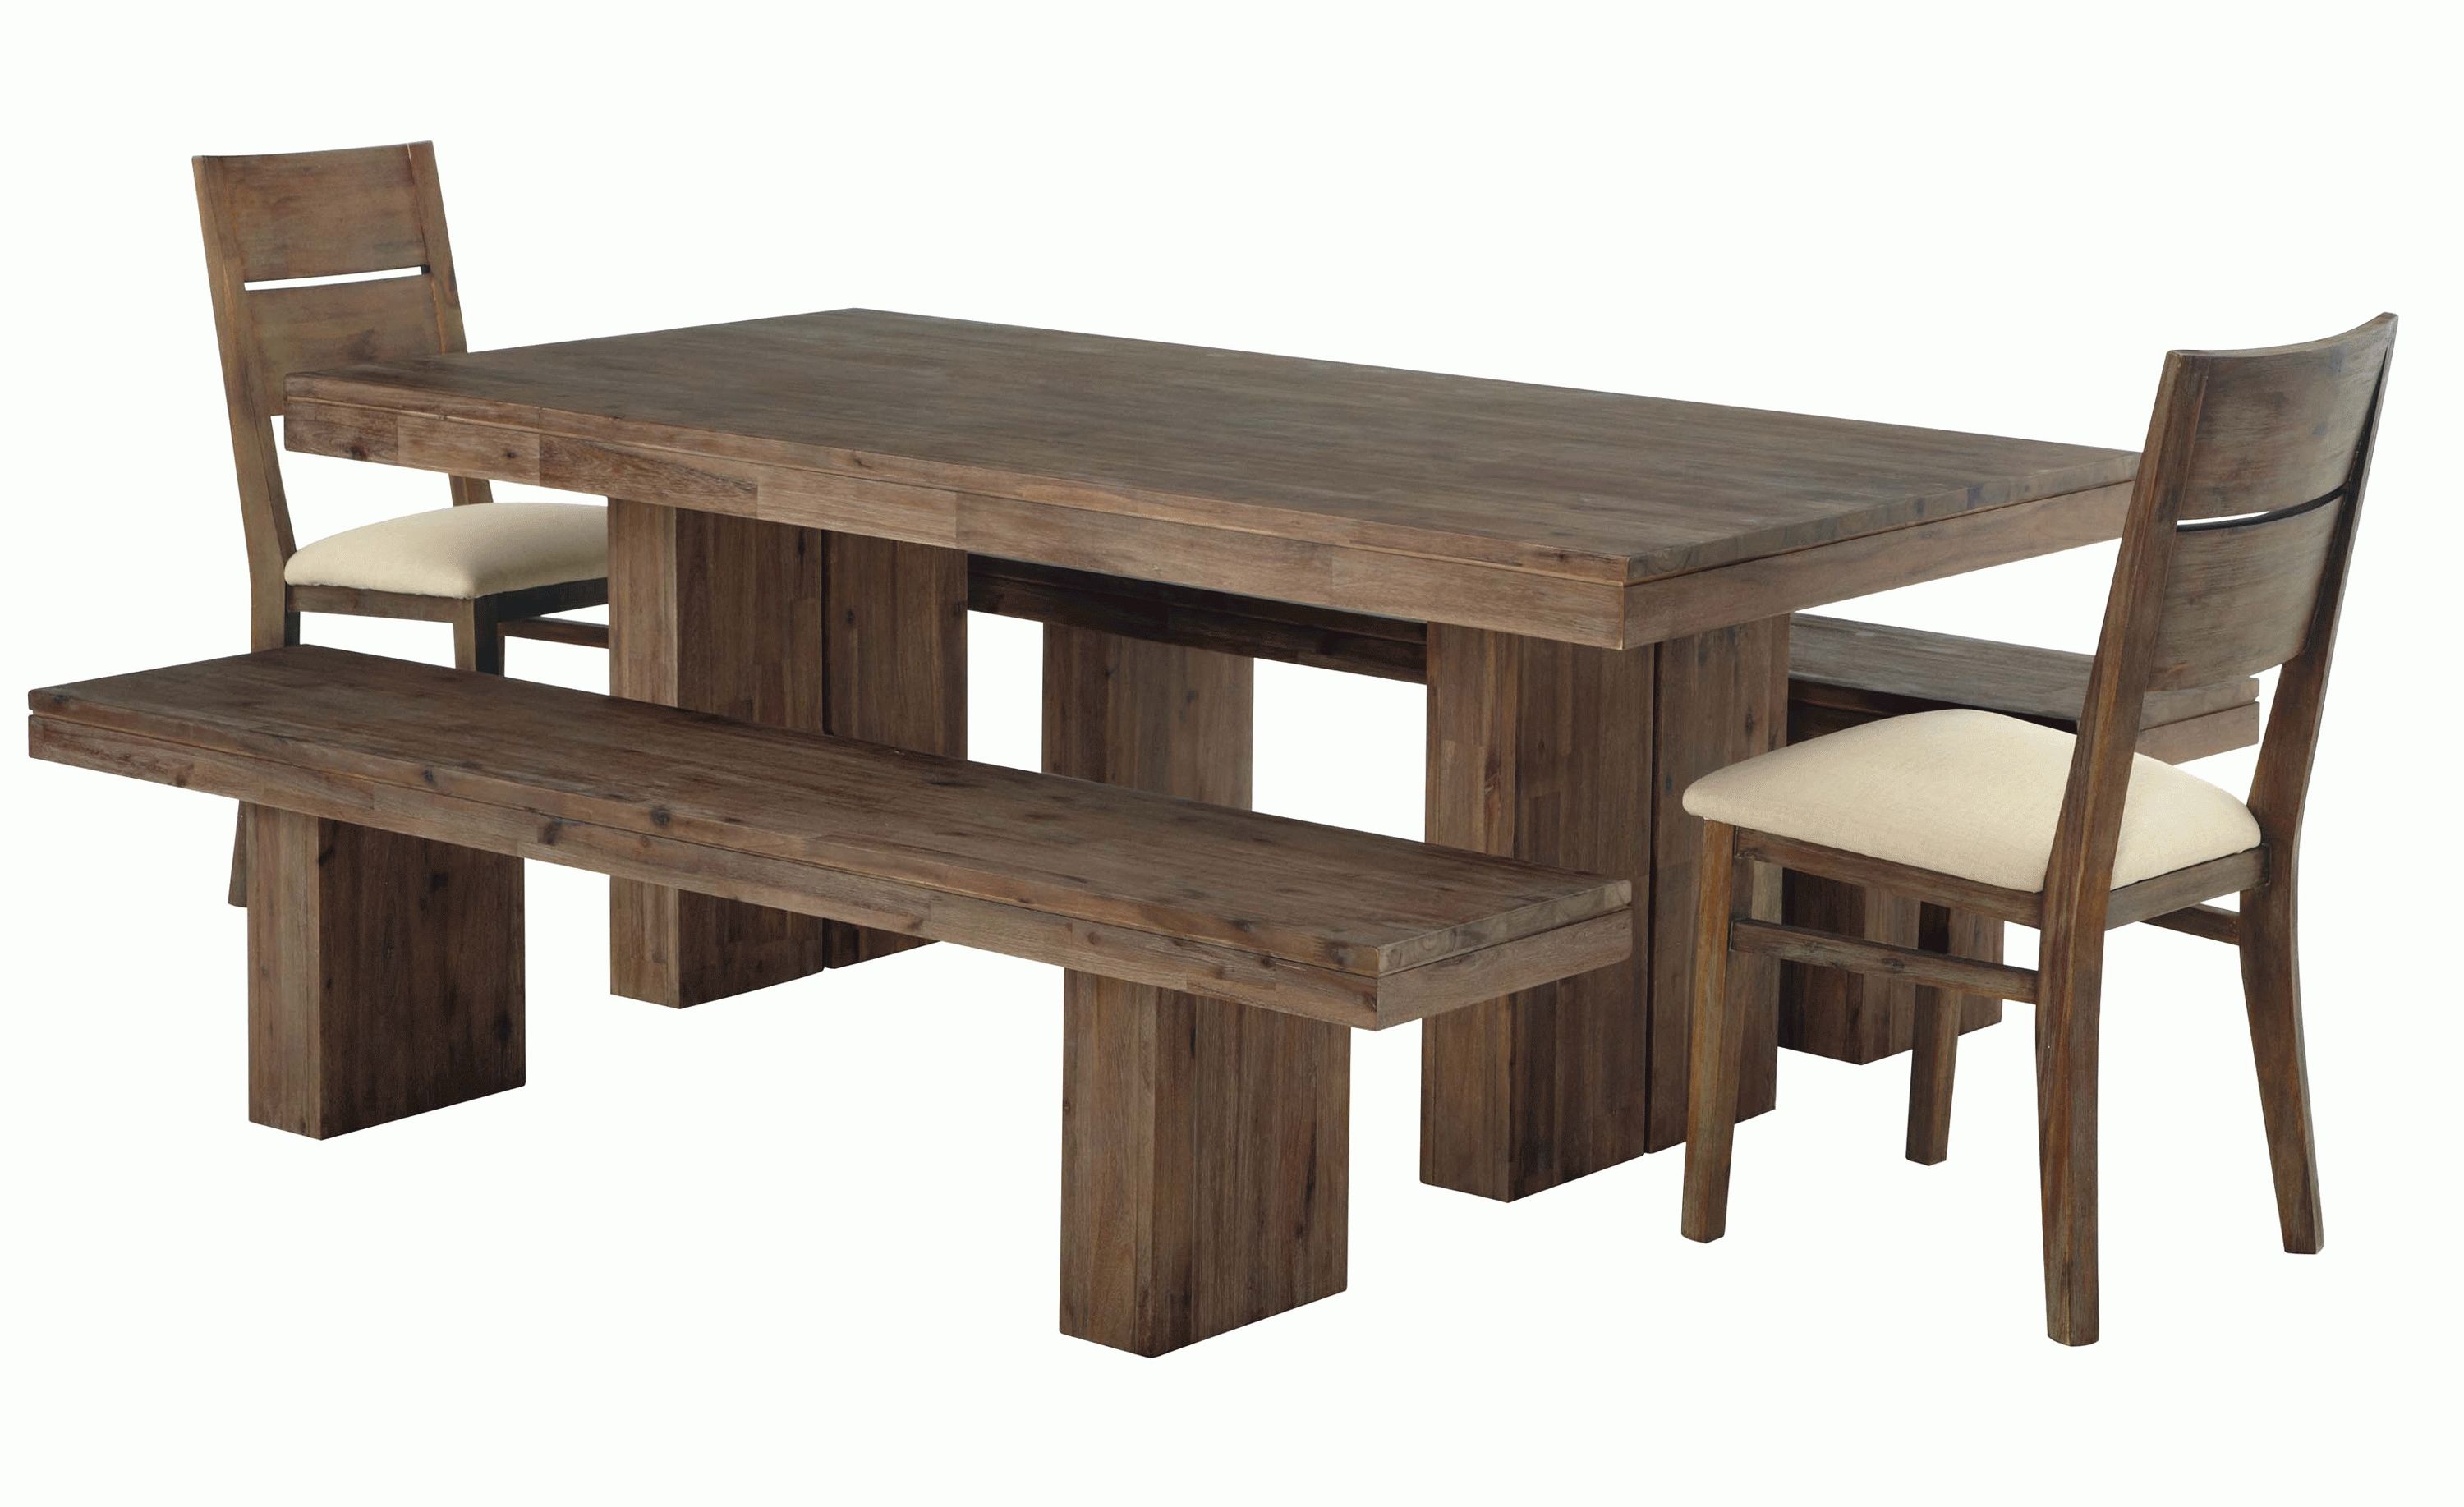 2018 Dining Table With Bench Seating (View 23 of 25)